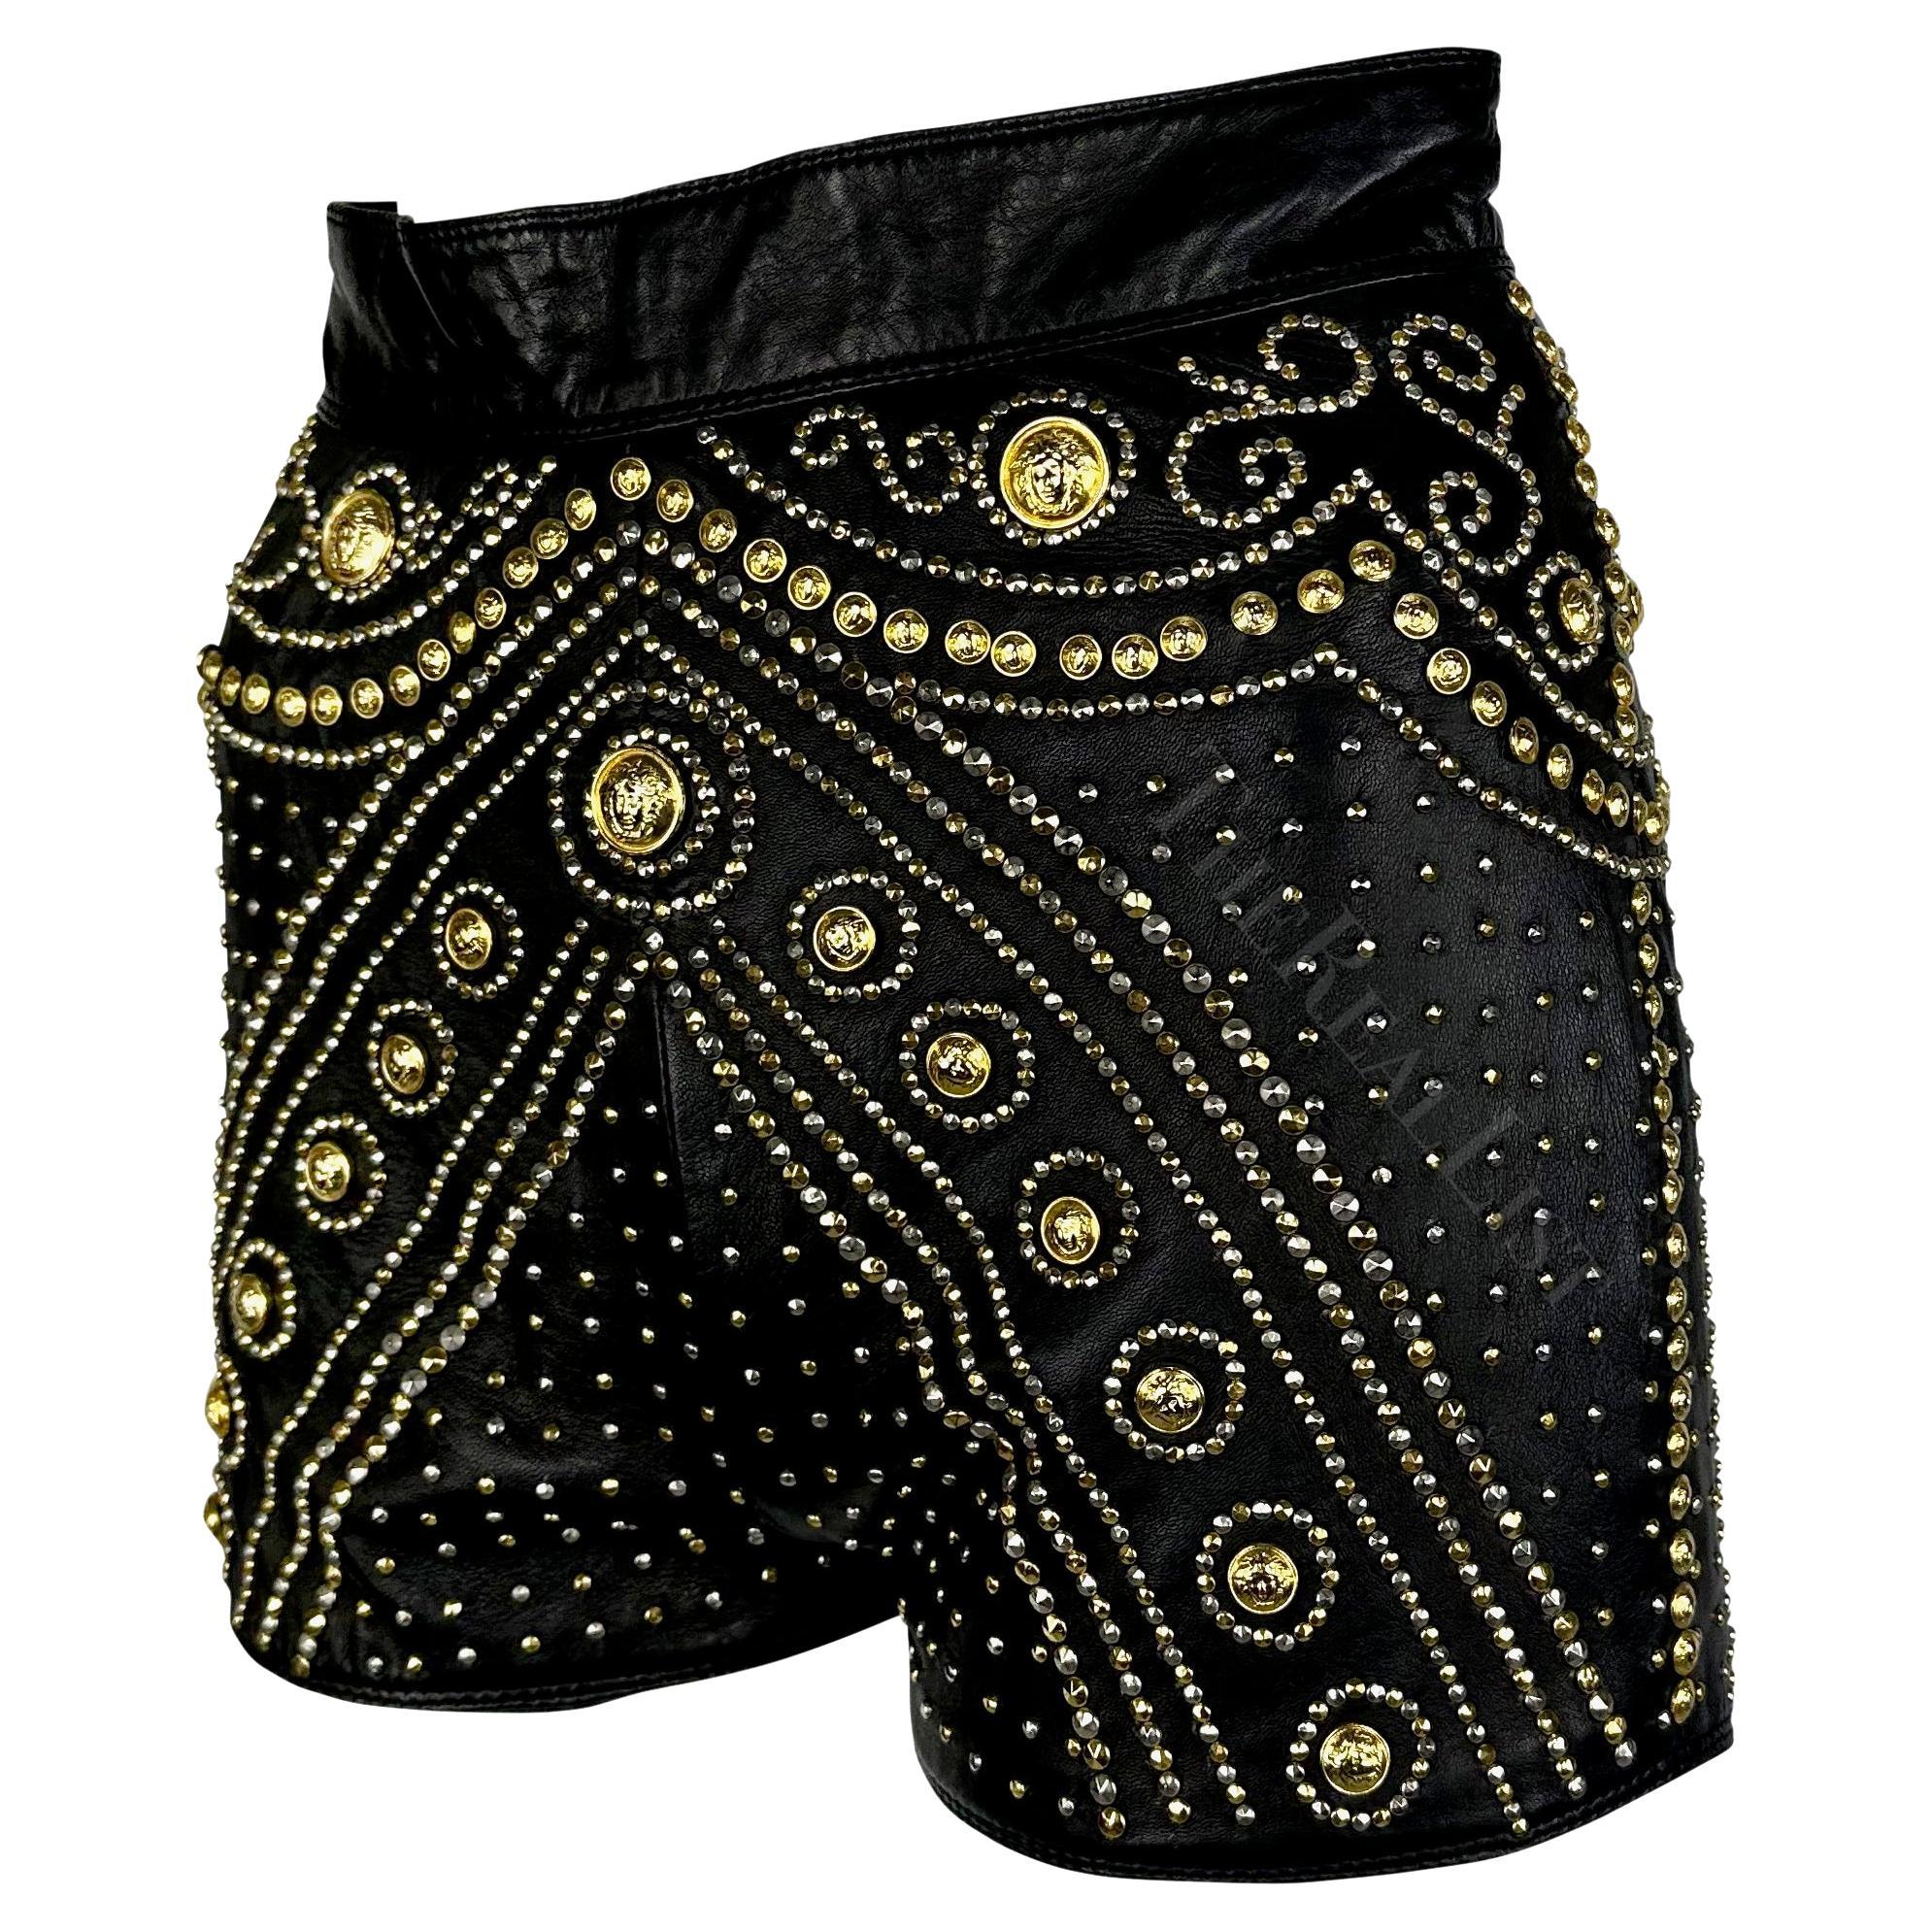 Women's F/W 1992 Atelier Versace Haute Couture Runway Medusa Studded Leather Shorts For Sale